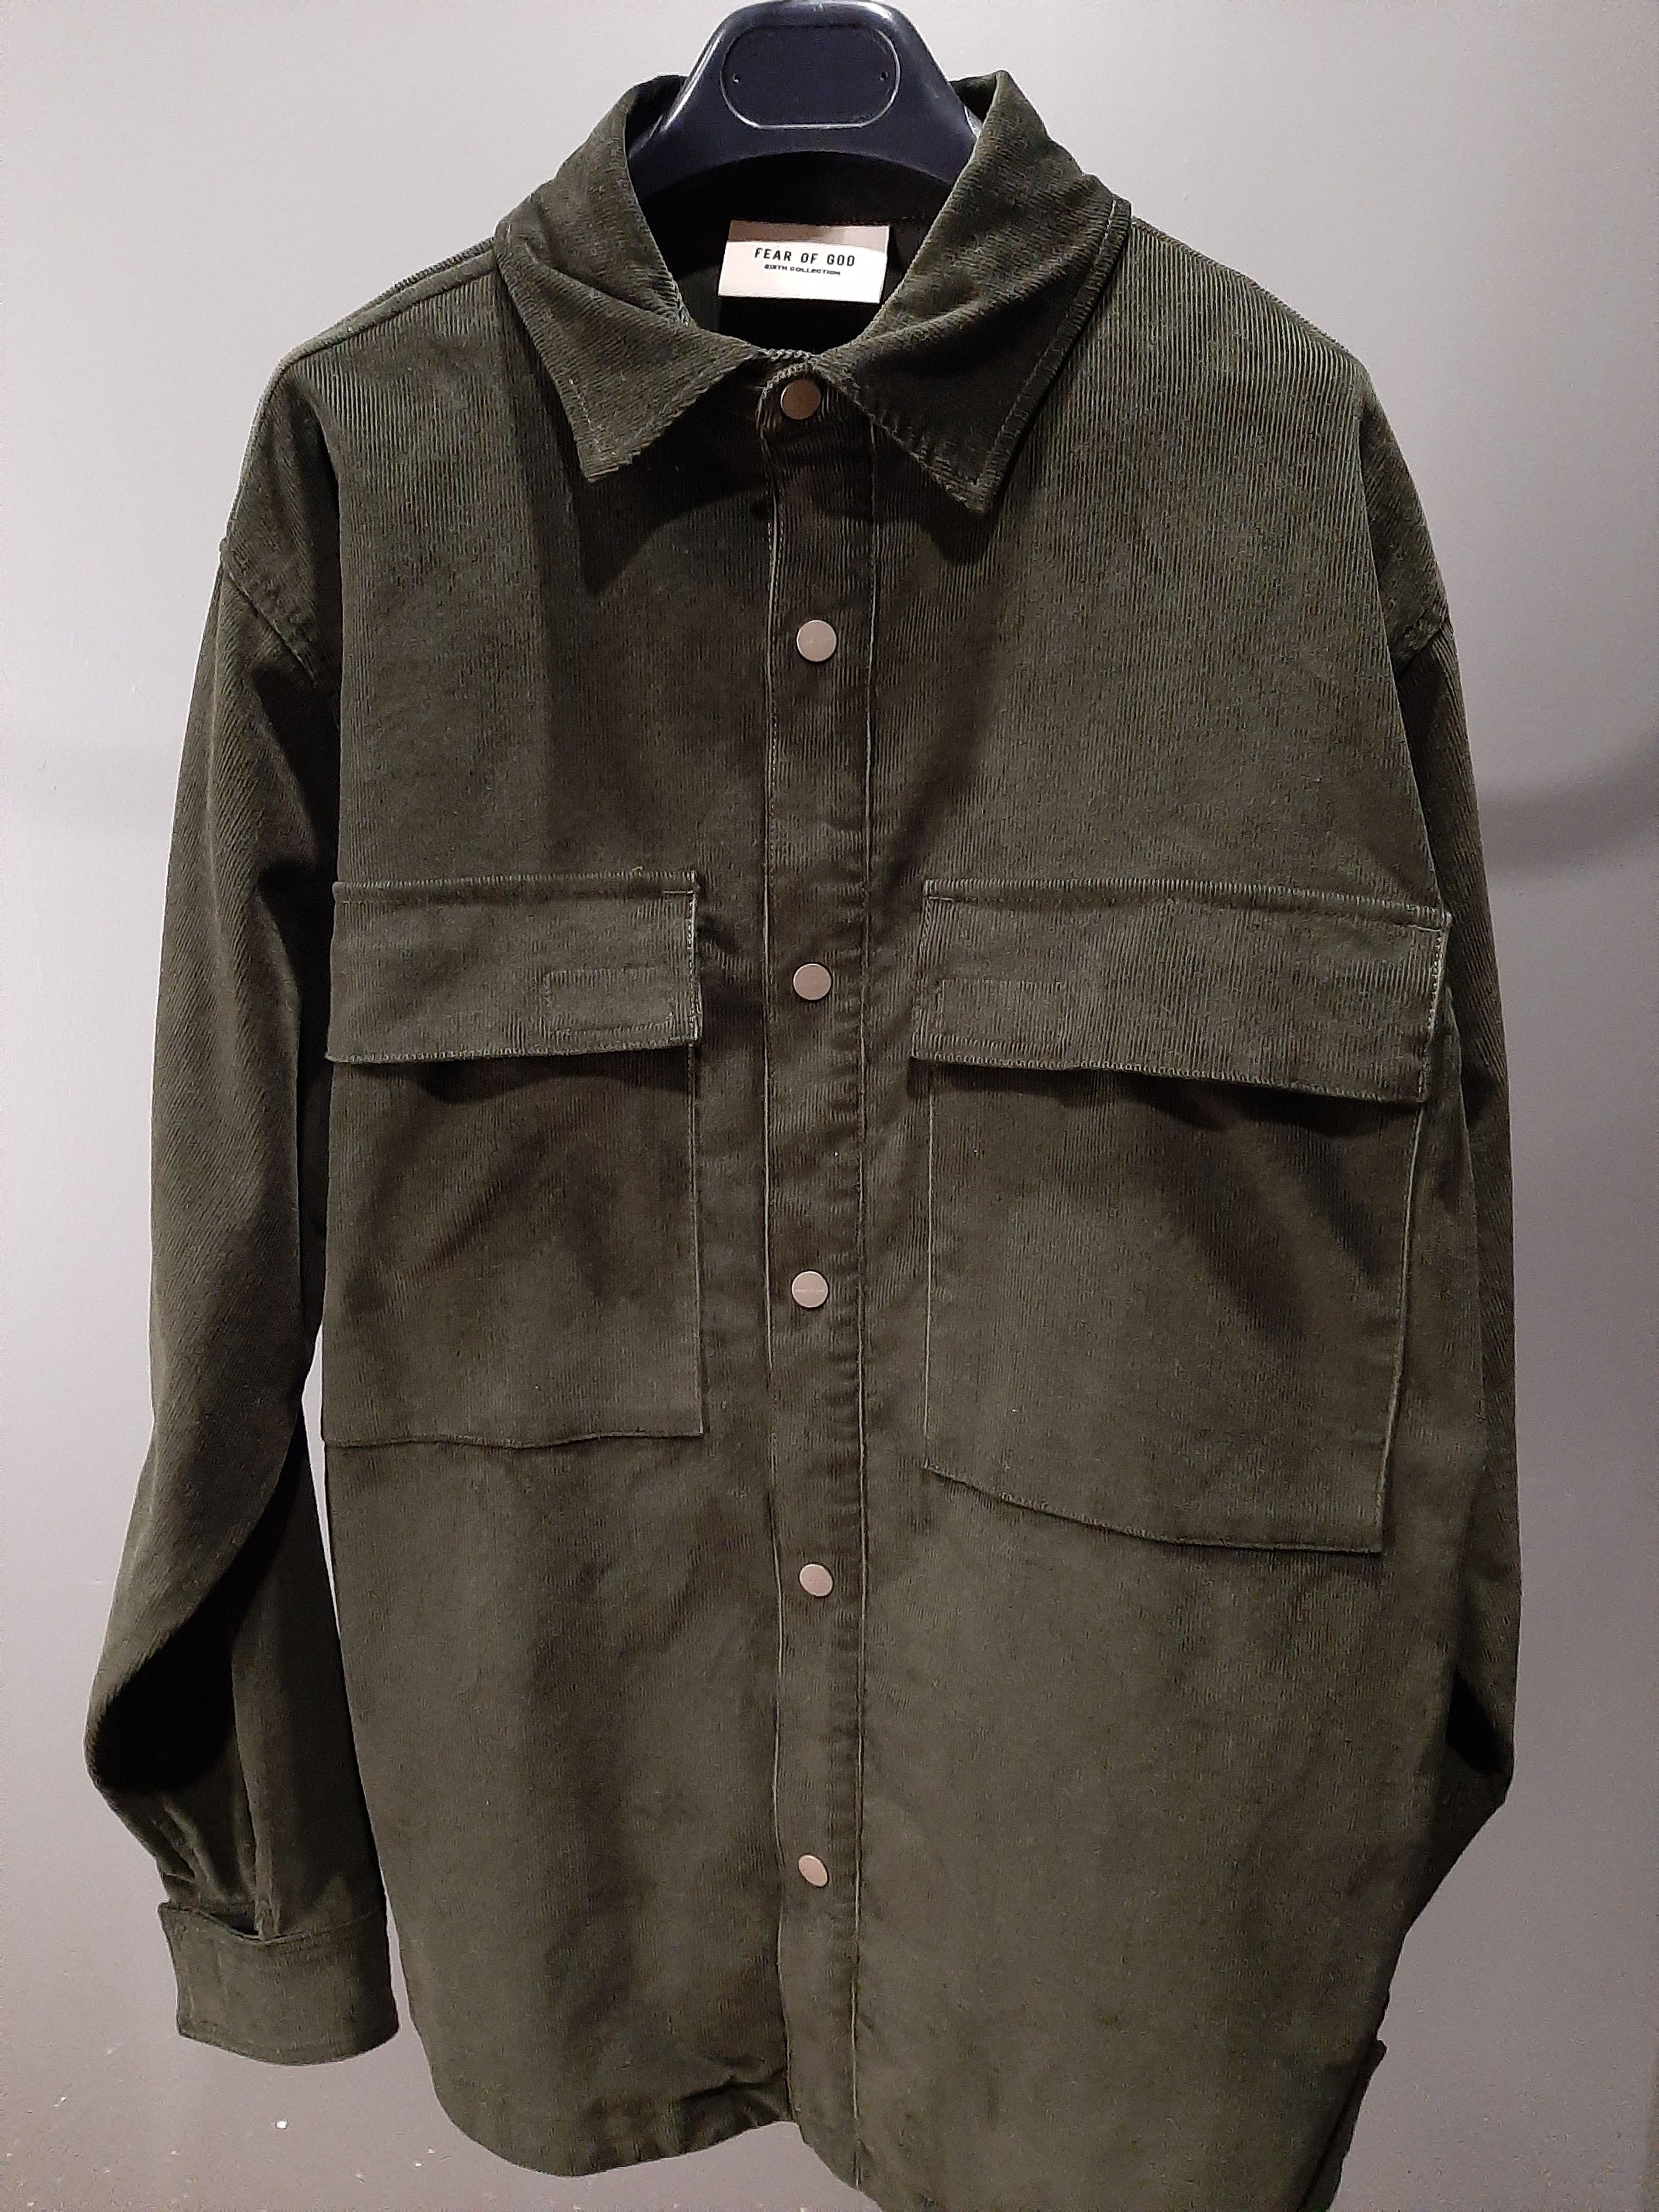 Fear of God CORDUROY SHIRT JACKET FOREST GREEN | Grailed